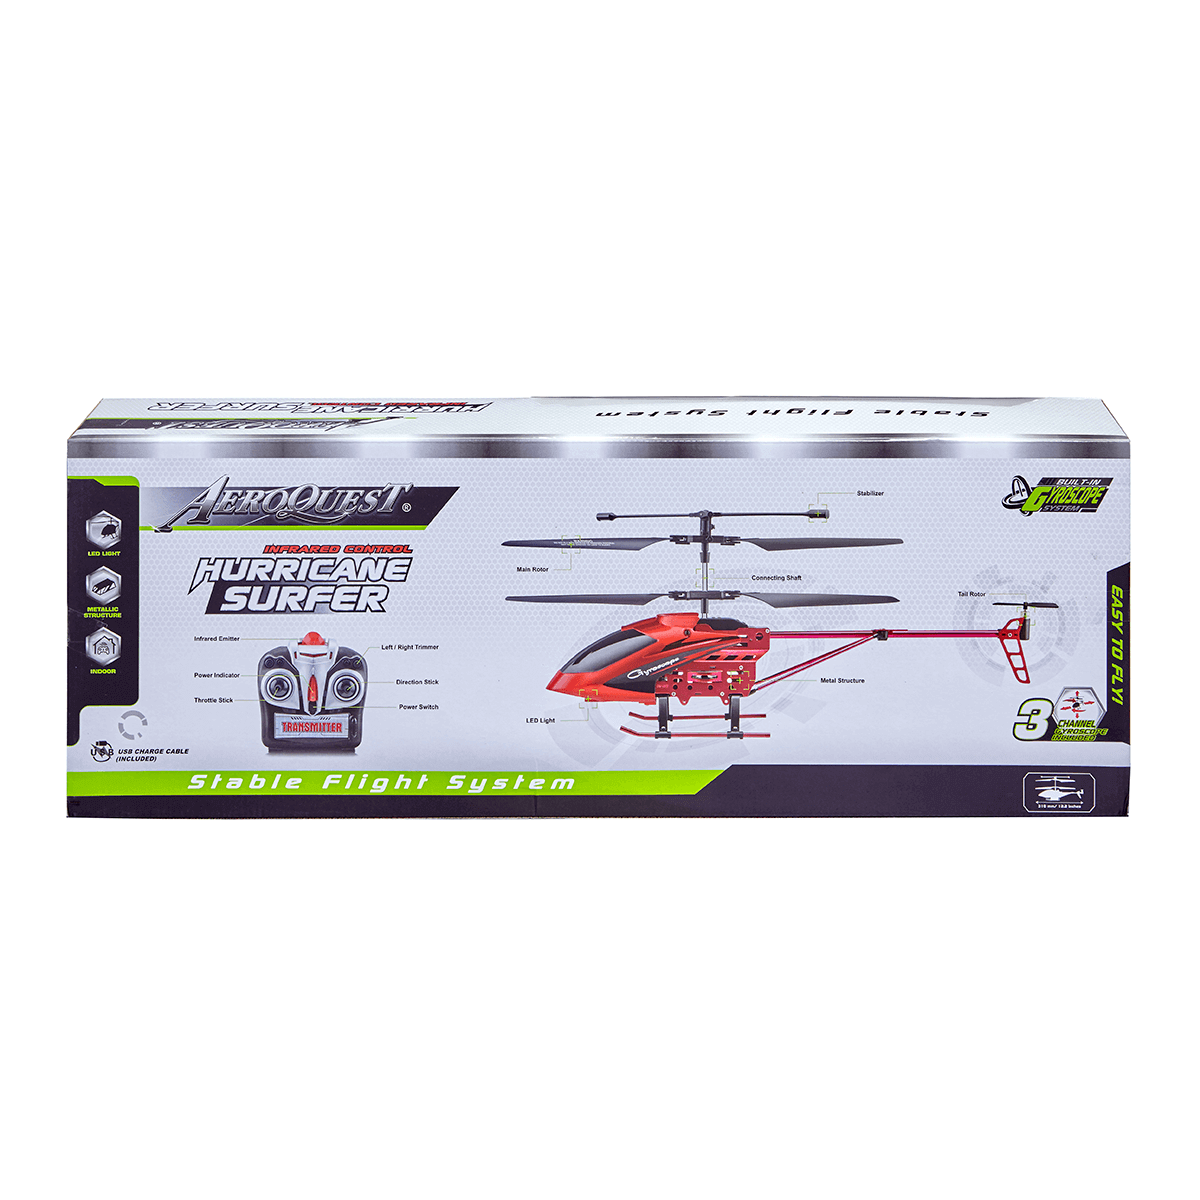 Hurricane Surfer RC Helicopter - Red